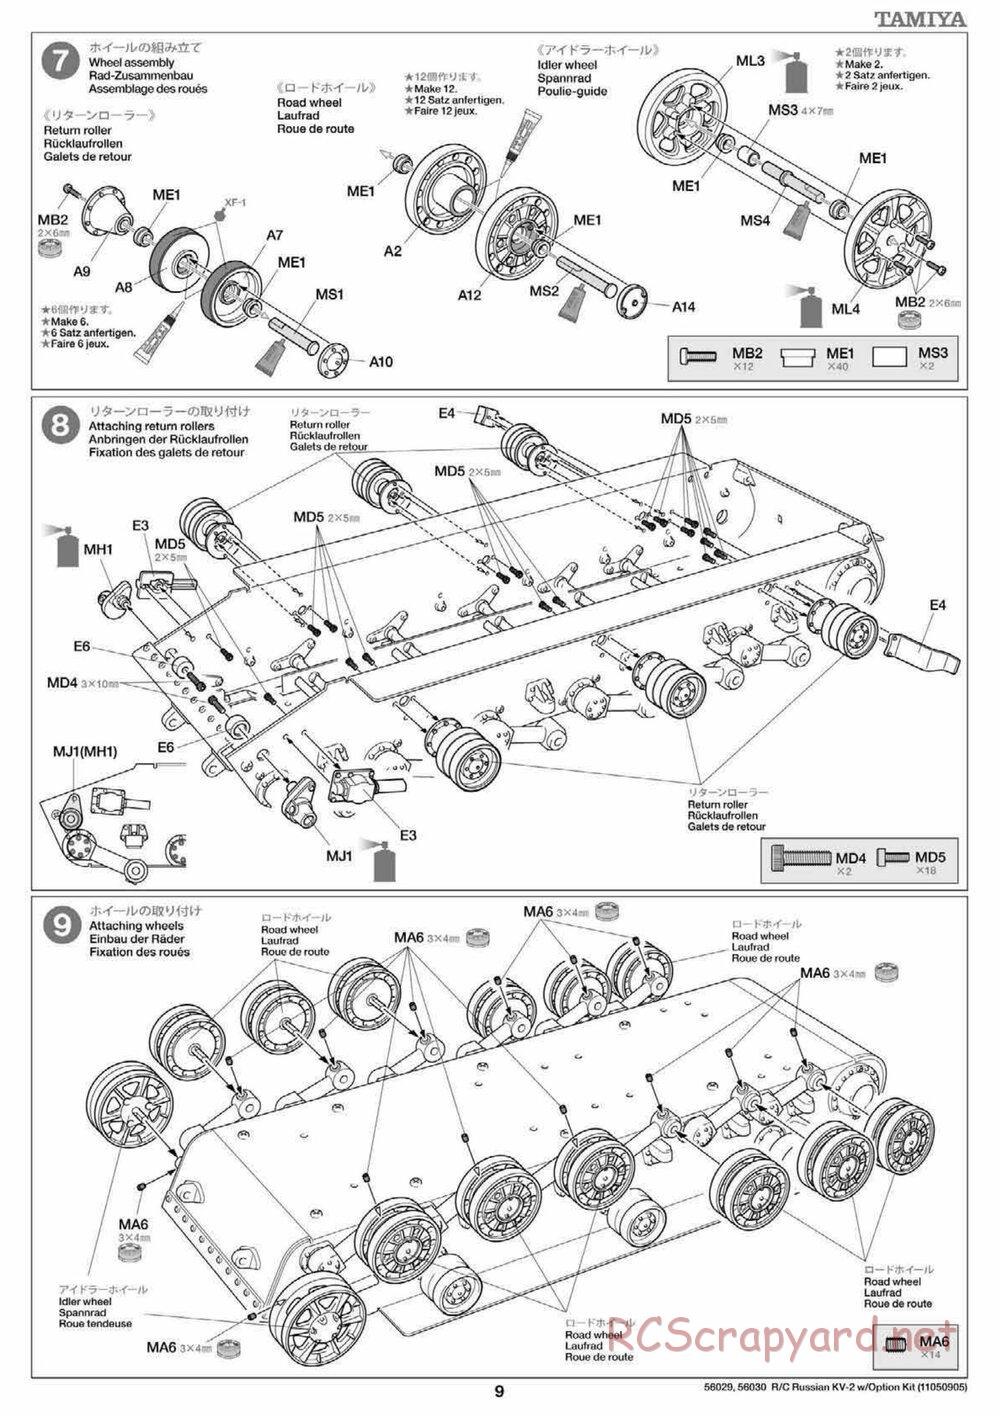 Tamiya - Russian Heavy Tank KV-2 Gigant - 1/16 Scale Chassis - Manual - Page 9